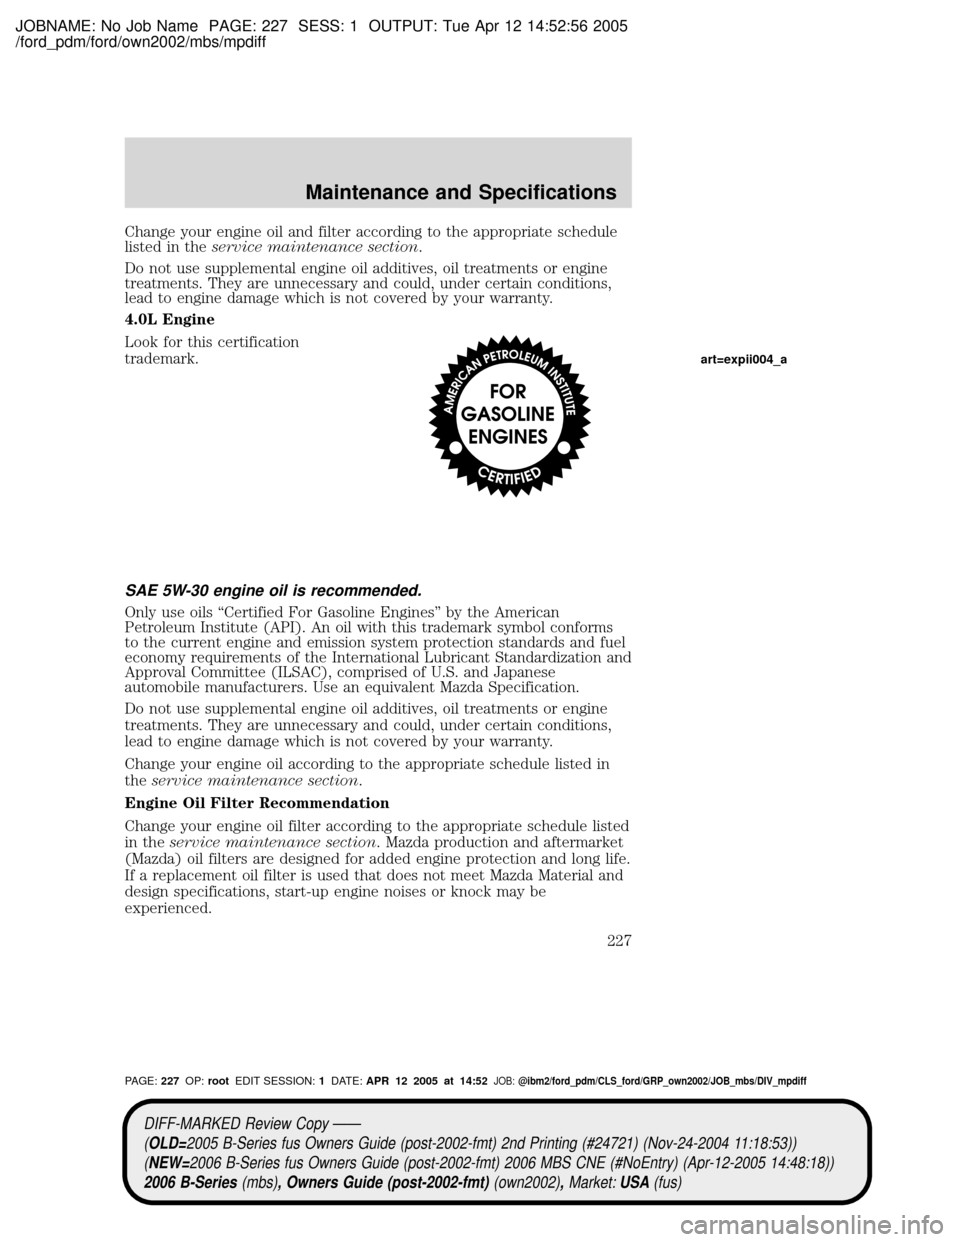 MAZDA MODEL B2300 TRUCK 2006  Owners Manual (in English) JOBNAME: No Job Name PAGE: 227 SESS: 1 OUTPUT: Tue Apr 12 14:52:56 2005
/ford_pdm/ford/own2002/mbs/mpdiff
Change your engine oil and filter according to the appropriate schedule
listed in theservice m